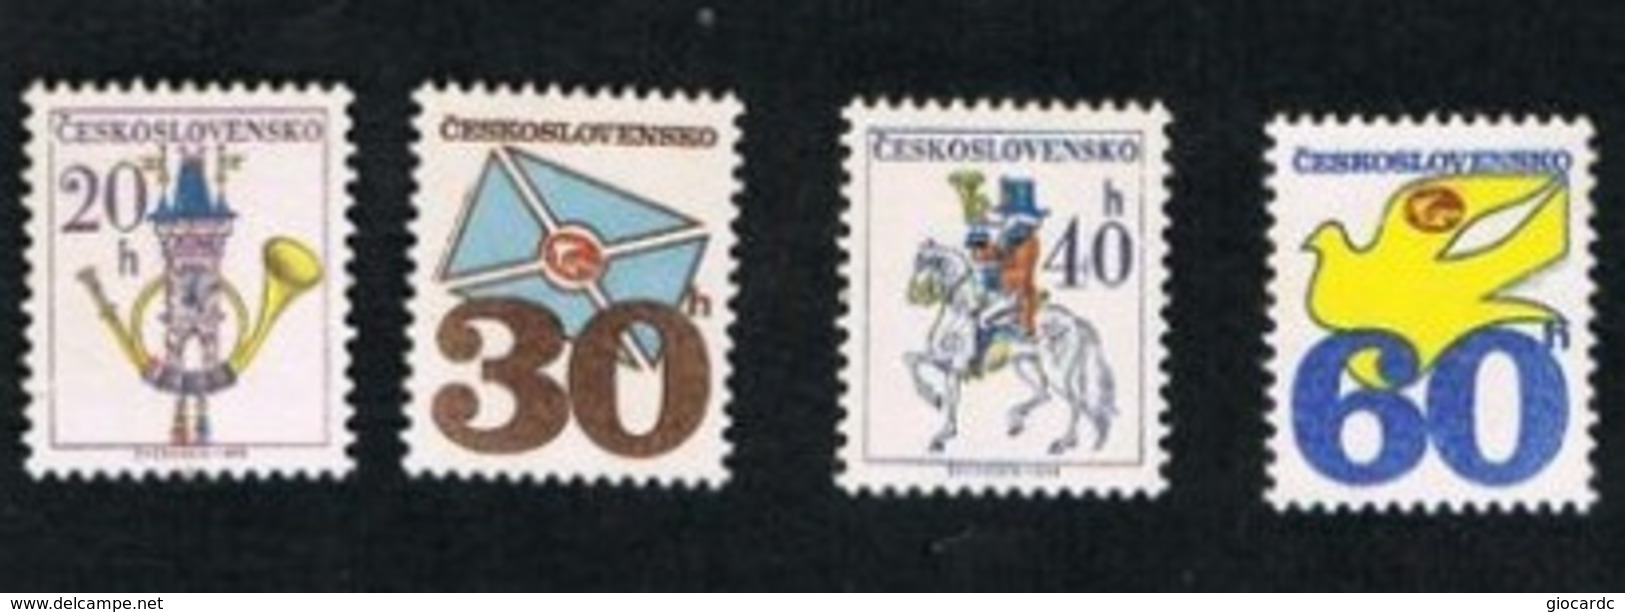 CECOSLOVACCHIA (CZECHOSLOVAKIA) -  SG 2190.2193 -   1974 NATIONAL POSTAL SERVICES (COMPLET SET OF 4) -  MINT** - Unused Stamps